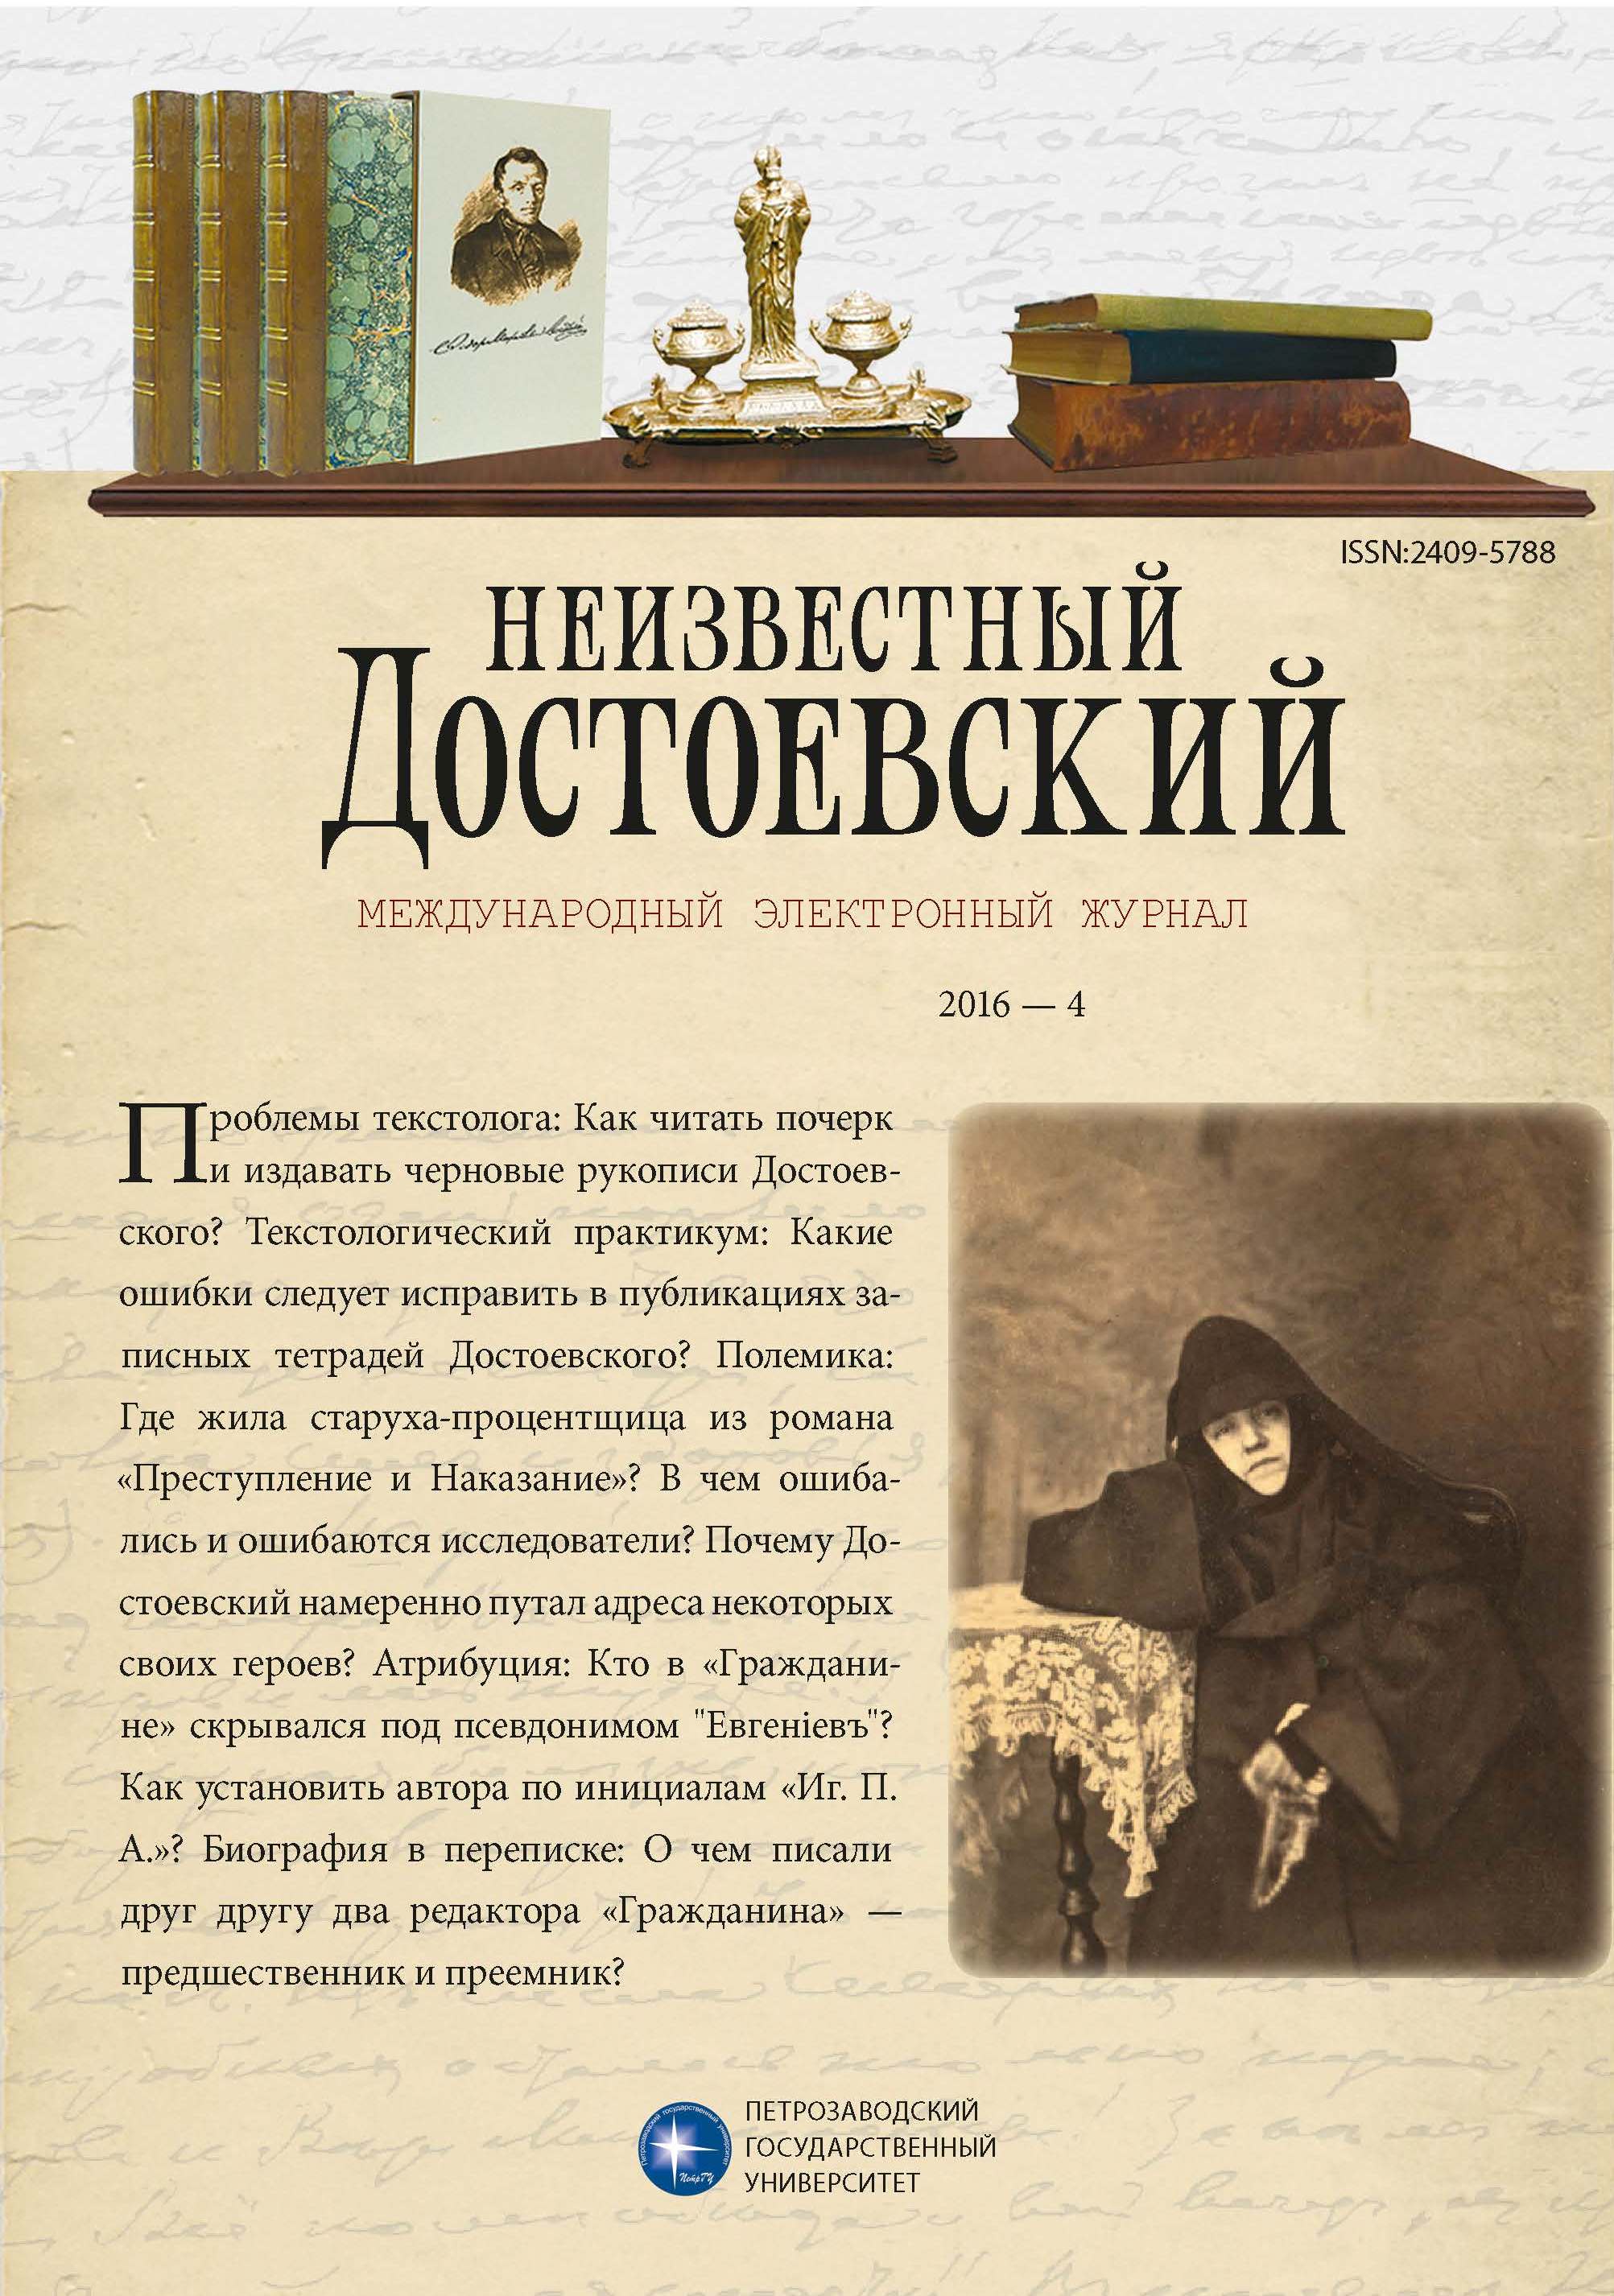 The Problems of the Publication of Dostoevsky’s Manuscripts (Based on Draft Manuscripts) Cover Image